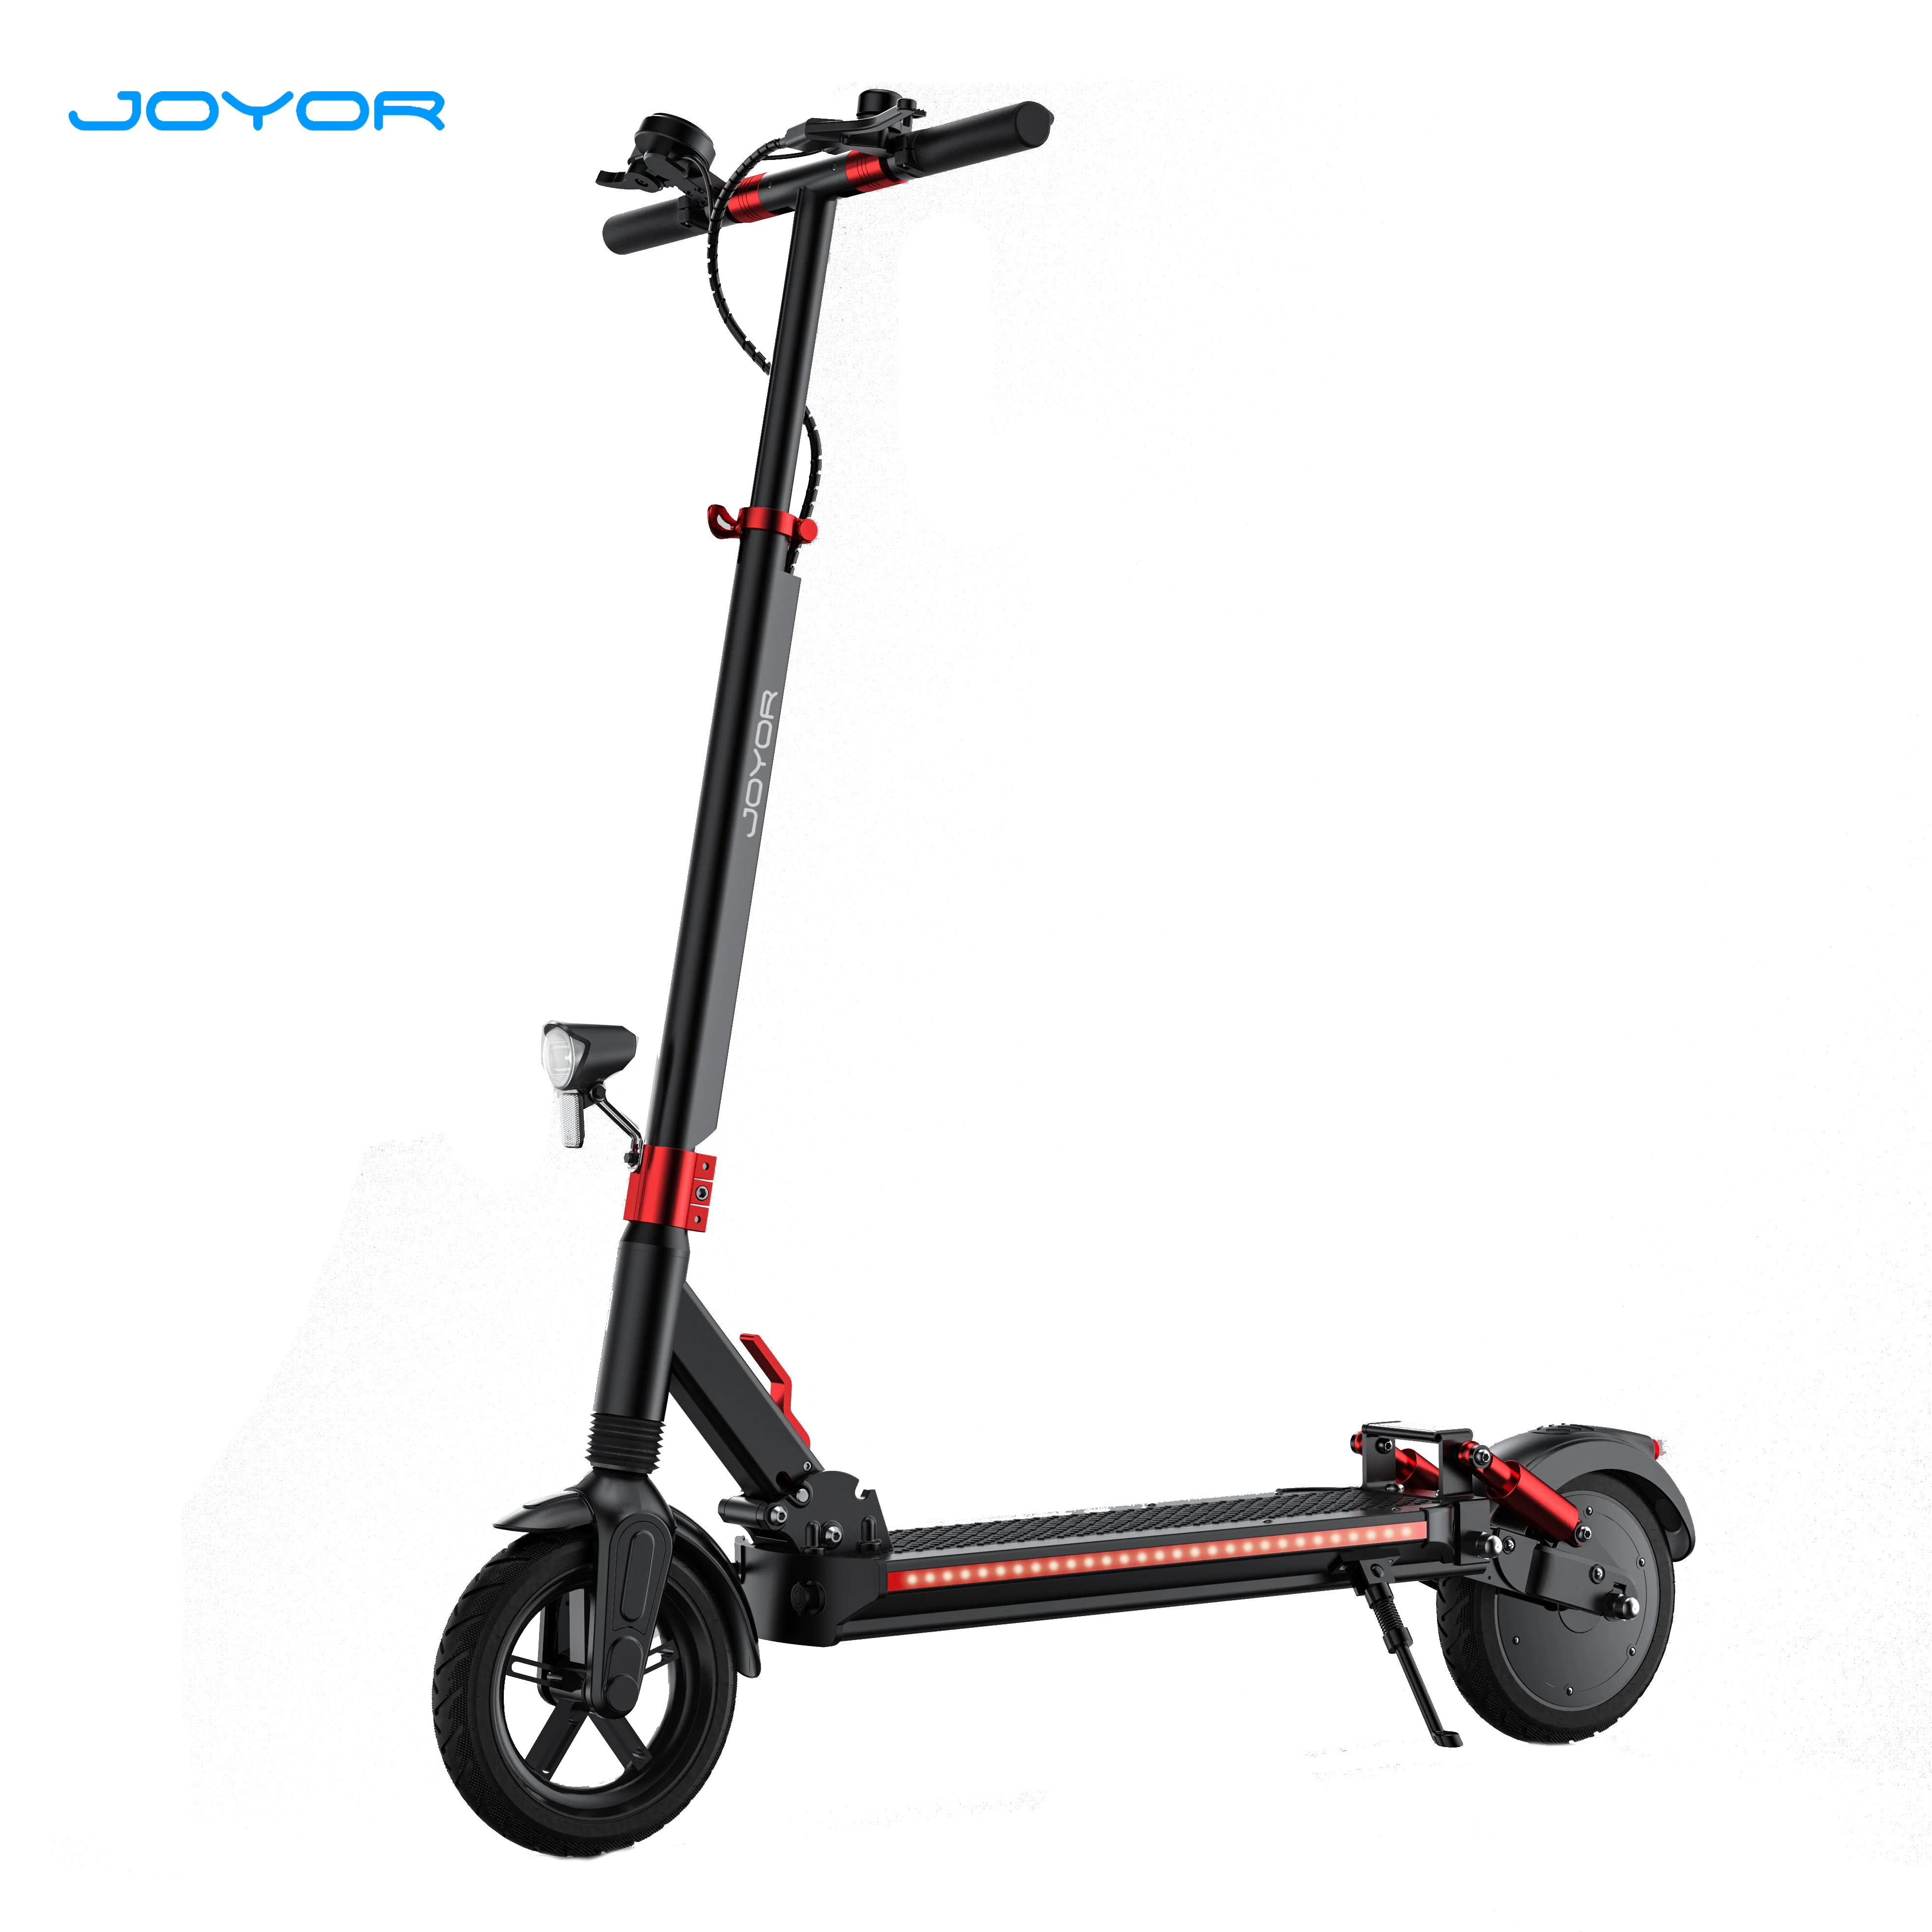 

2021 New Upgrade Folding Electric mobility Scooter Portable G5 48V Kick Scooter Foldable CE Certification for Adult Max Unisex